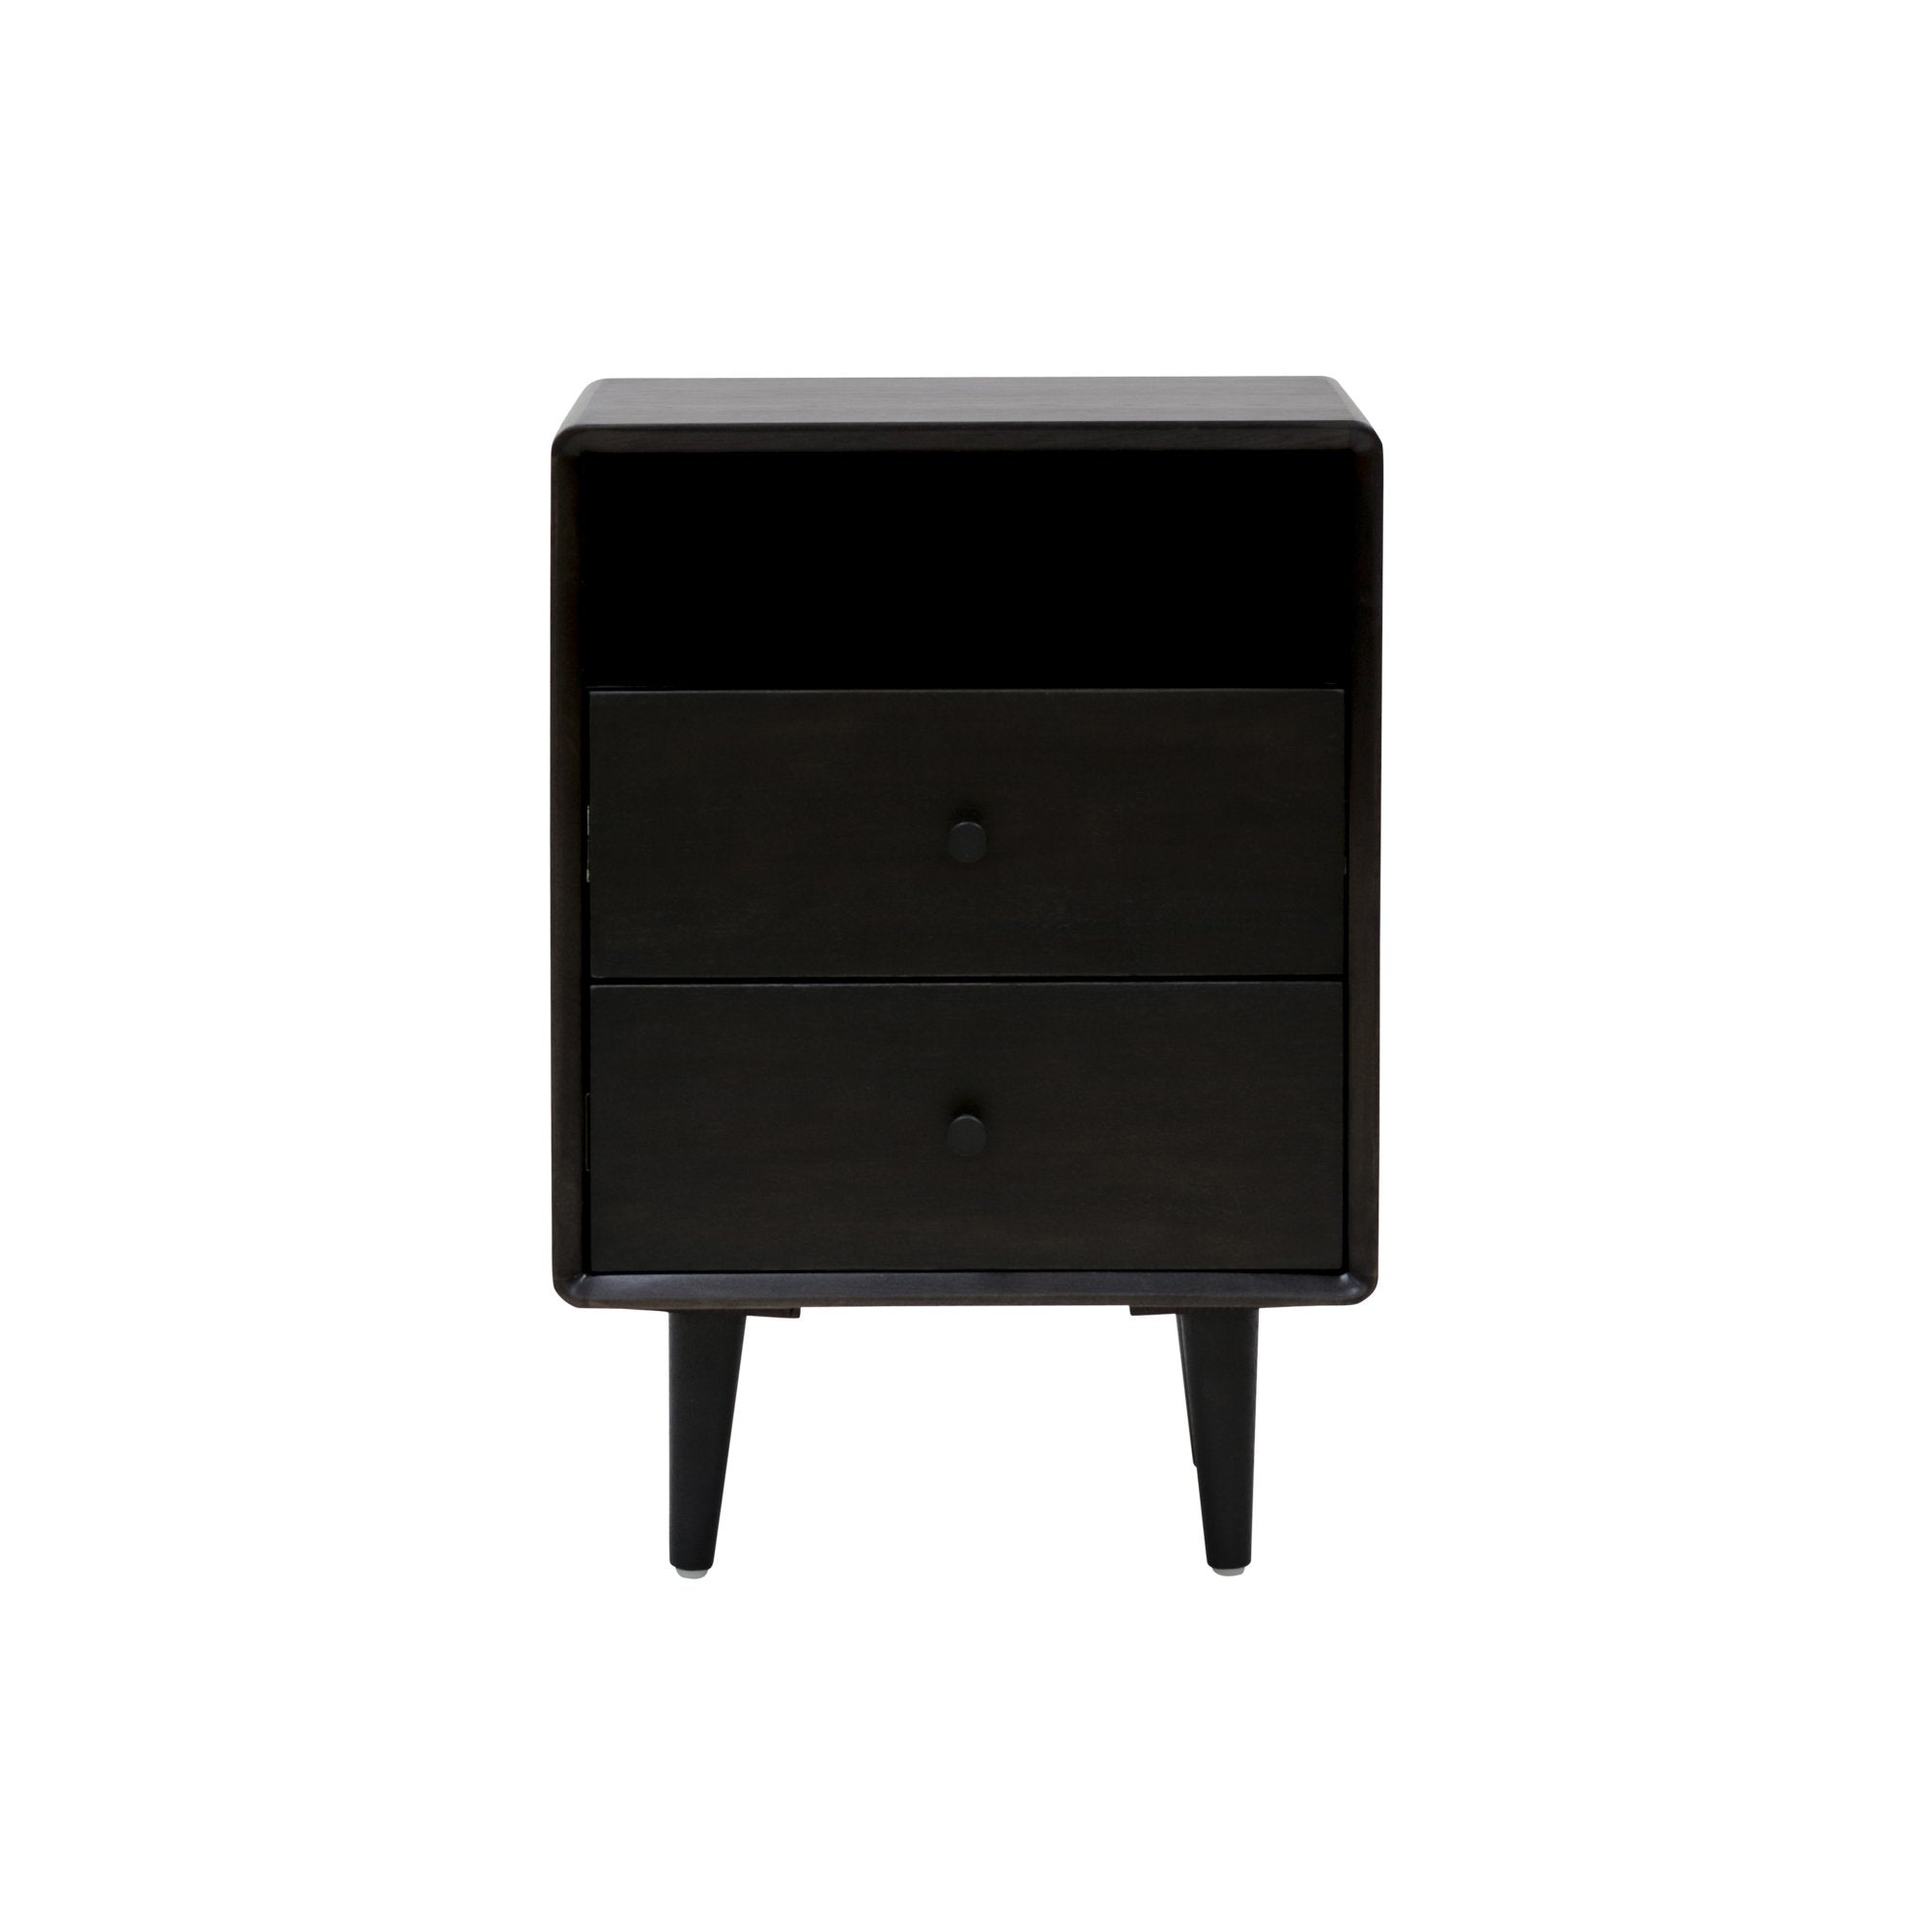 Noche 2-Drawer Wooden Bedside Table Nightstand - Black Fast shipping On sale